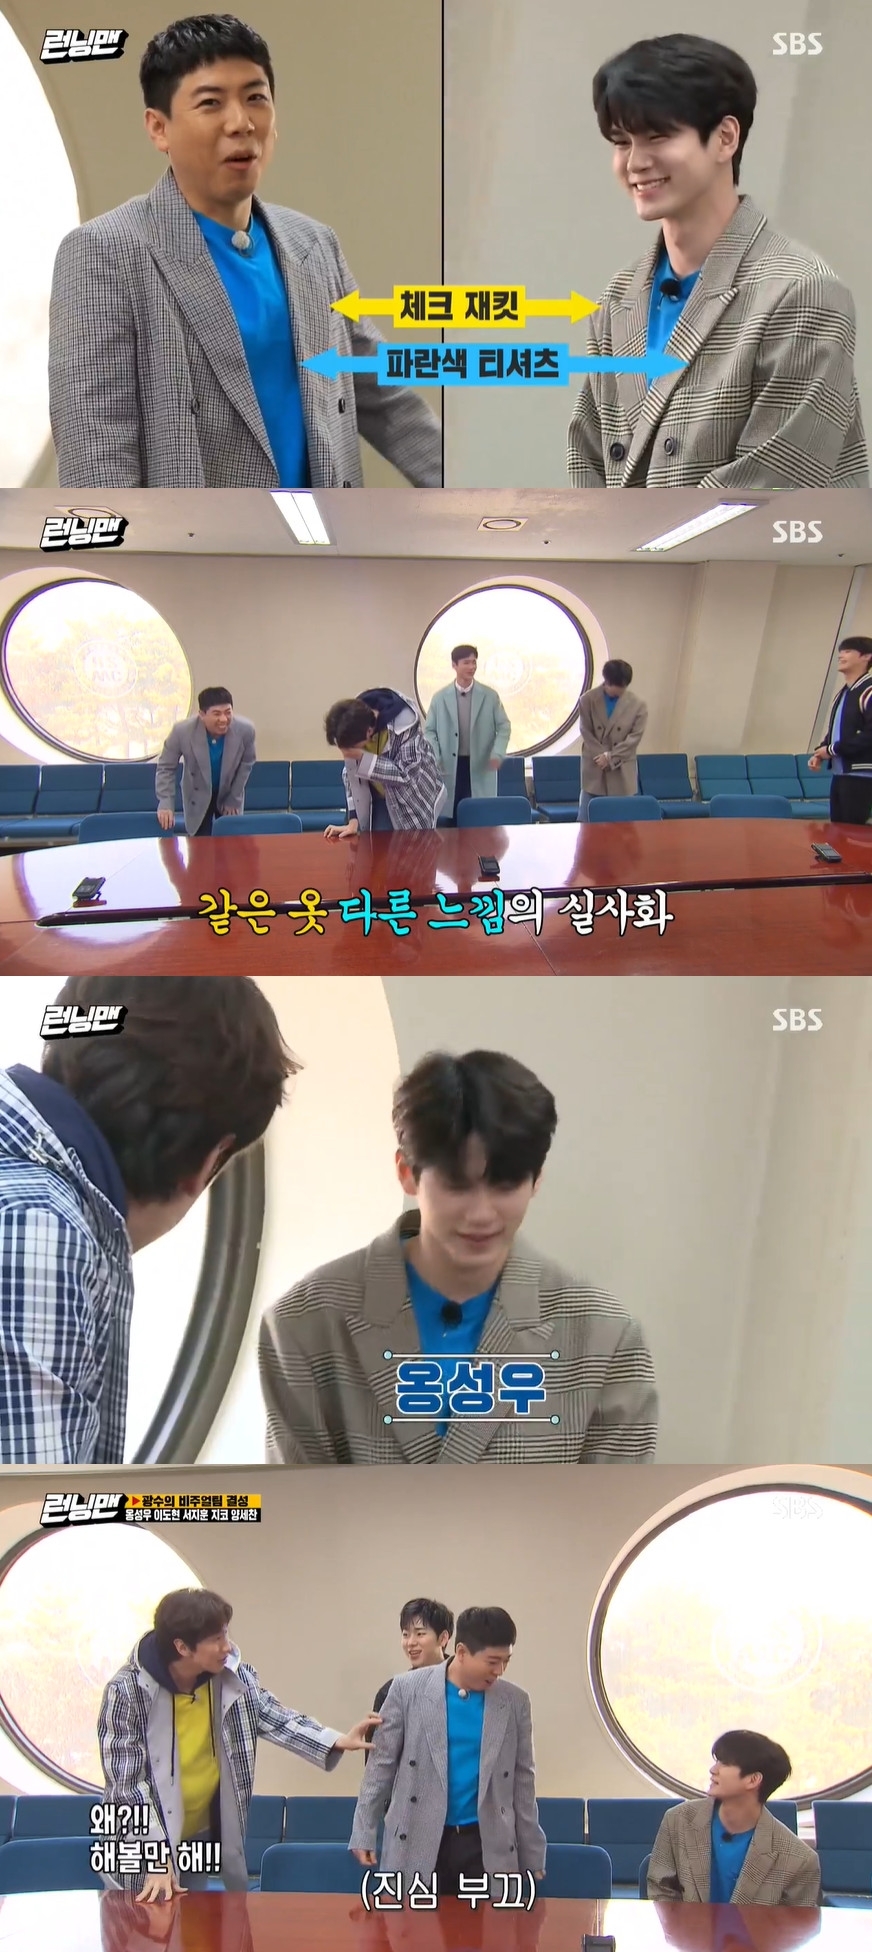 Seoul = = Yang Se-chan and Ong Seong-wu showed different Feelings fashions in the same style.On the 29th, SBS Running Man broadcasted at 5 pm, Ong Seo-woo Lee Do-hyun Seo Ji-hoon Zico rushed to the guest.Yang Se-chan, who wore a blue T-shirt on the day of the check jacket, and Ong Seong-wu, who appeared as a guest, also came out wearing a check jacket and a blue T-shirt.Yang Se-chan laughed and laughed, and Lee Kwang-soo laughed, saying, Its worth a try, sitting down Ong Seong-wu and Yang Se-chan side by side.Meanwhile, Running Man is broadcast every Sunday at 5 pm.